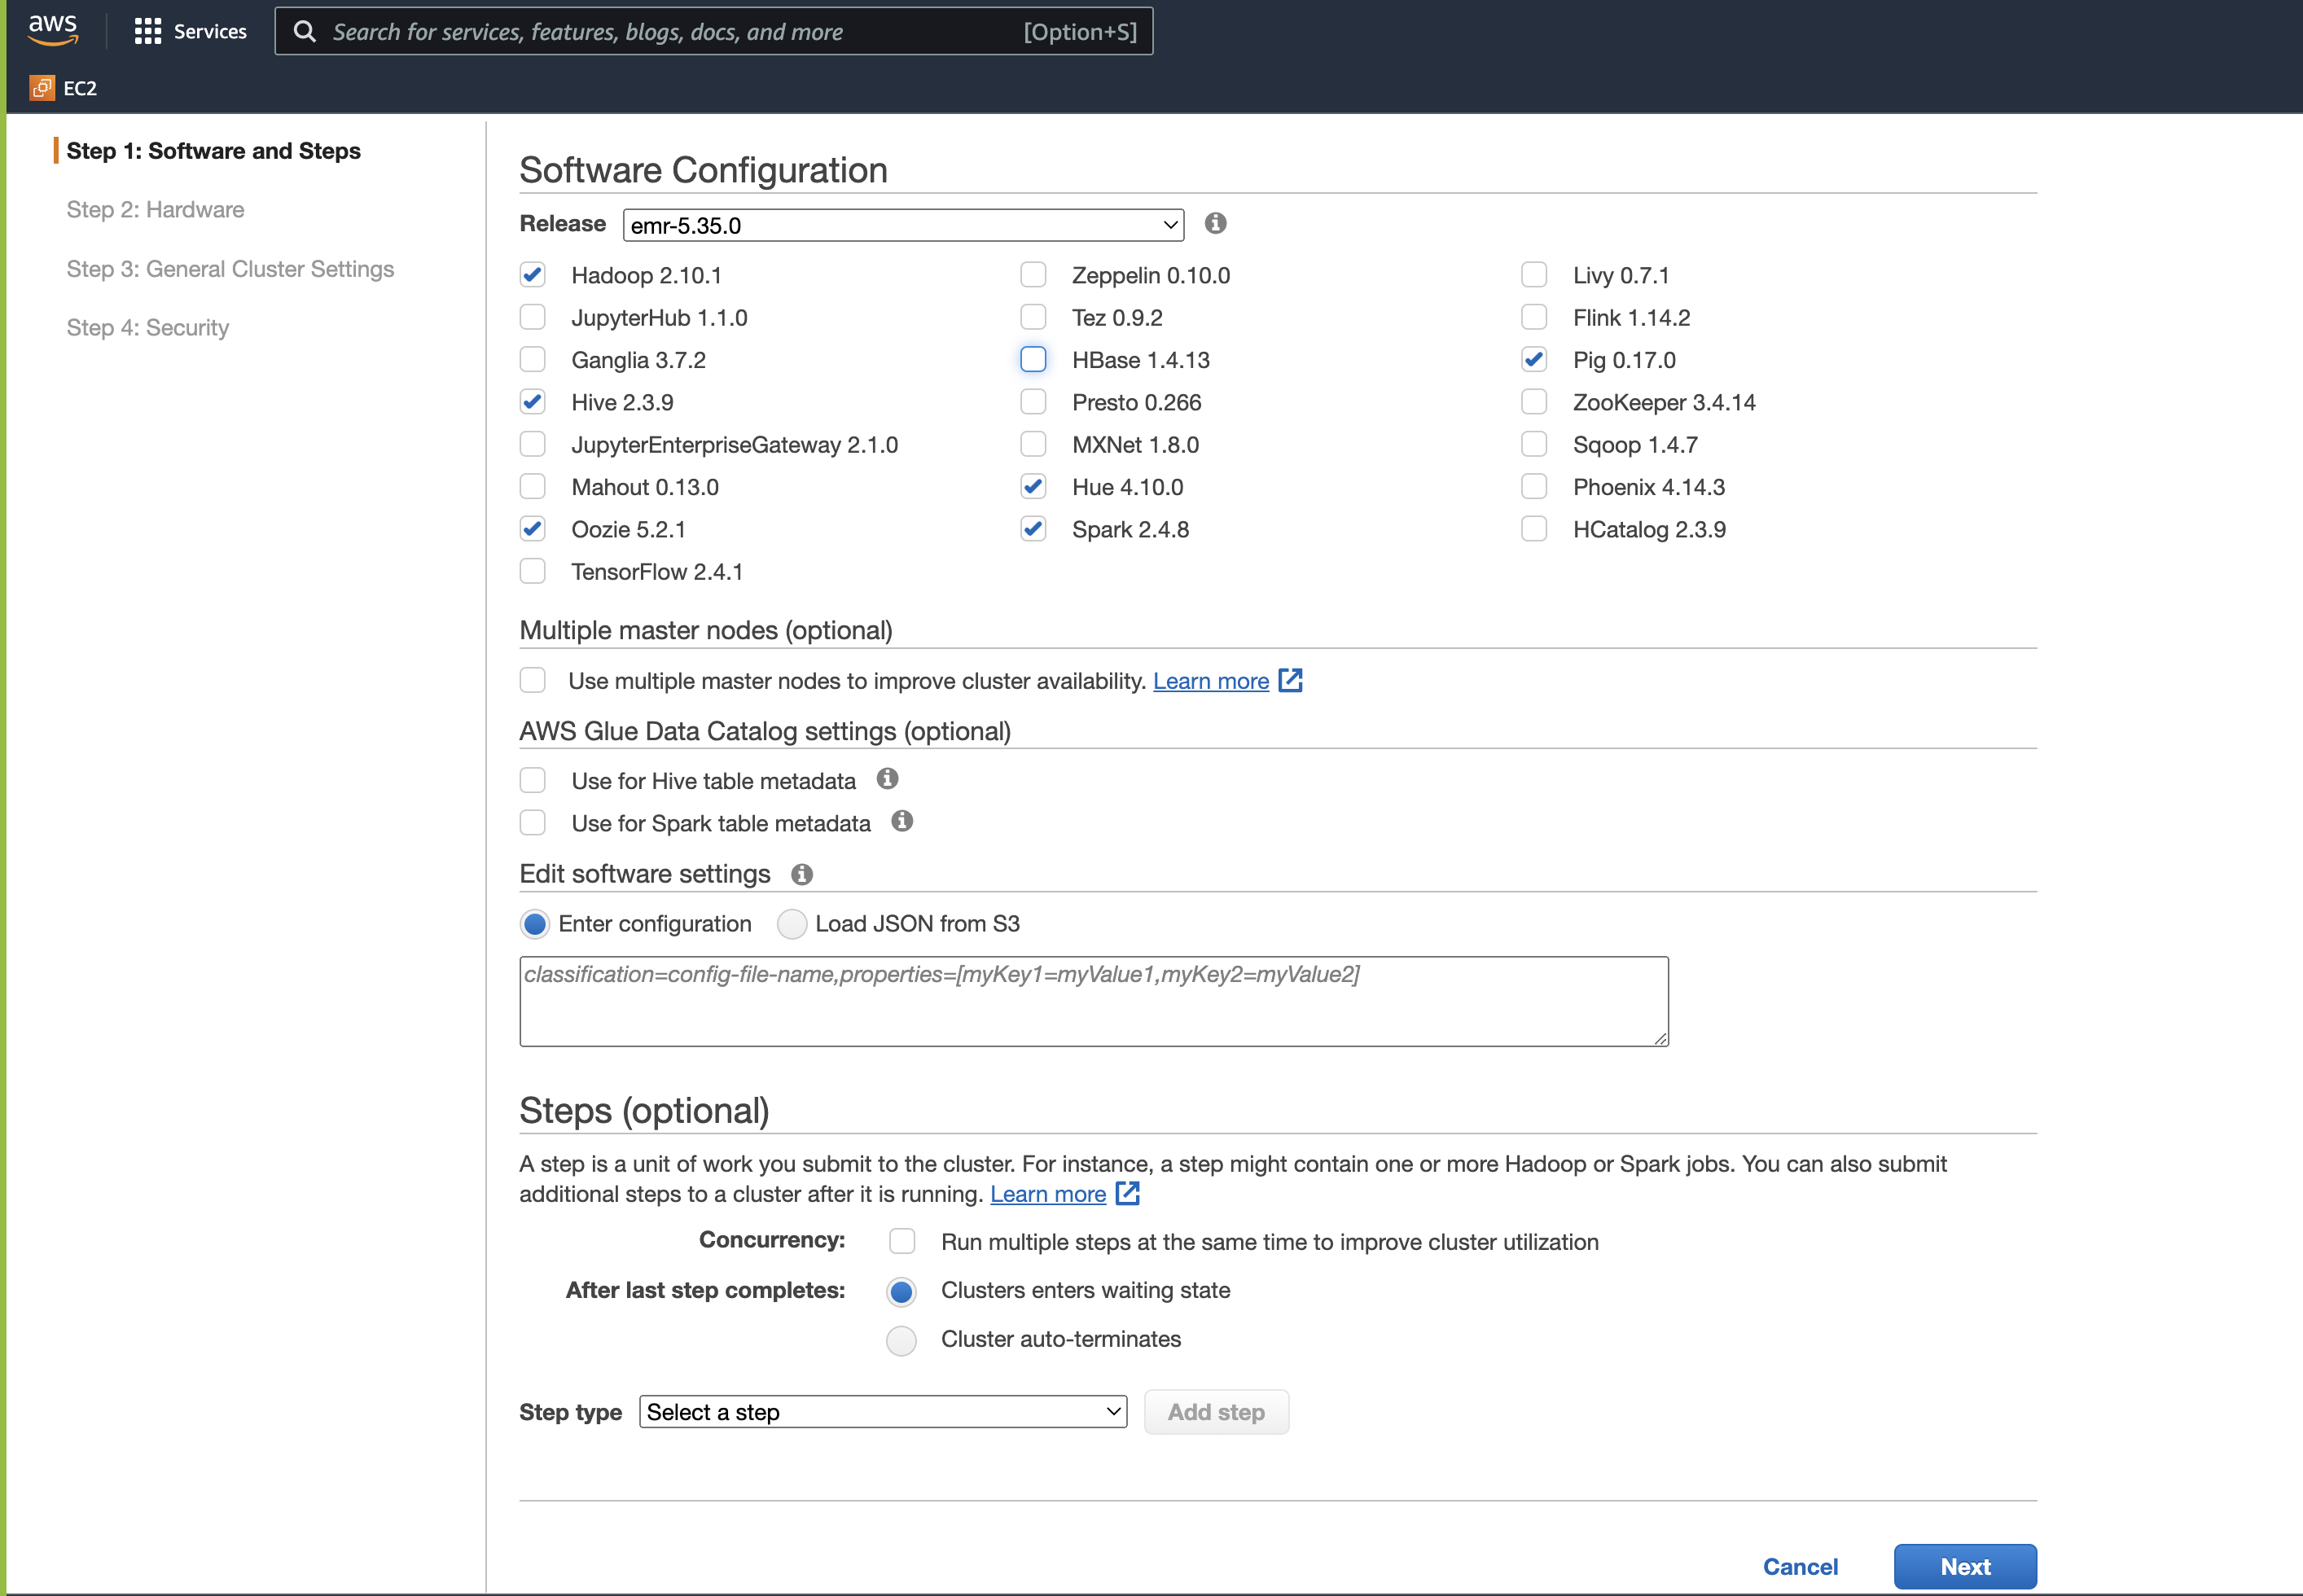 aws-marketpplace-step2a-advanced-options-softwareconfig.png